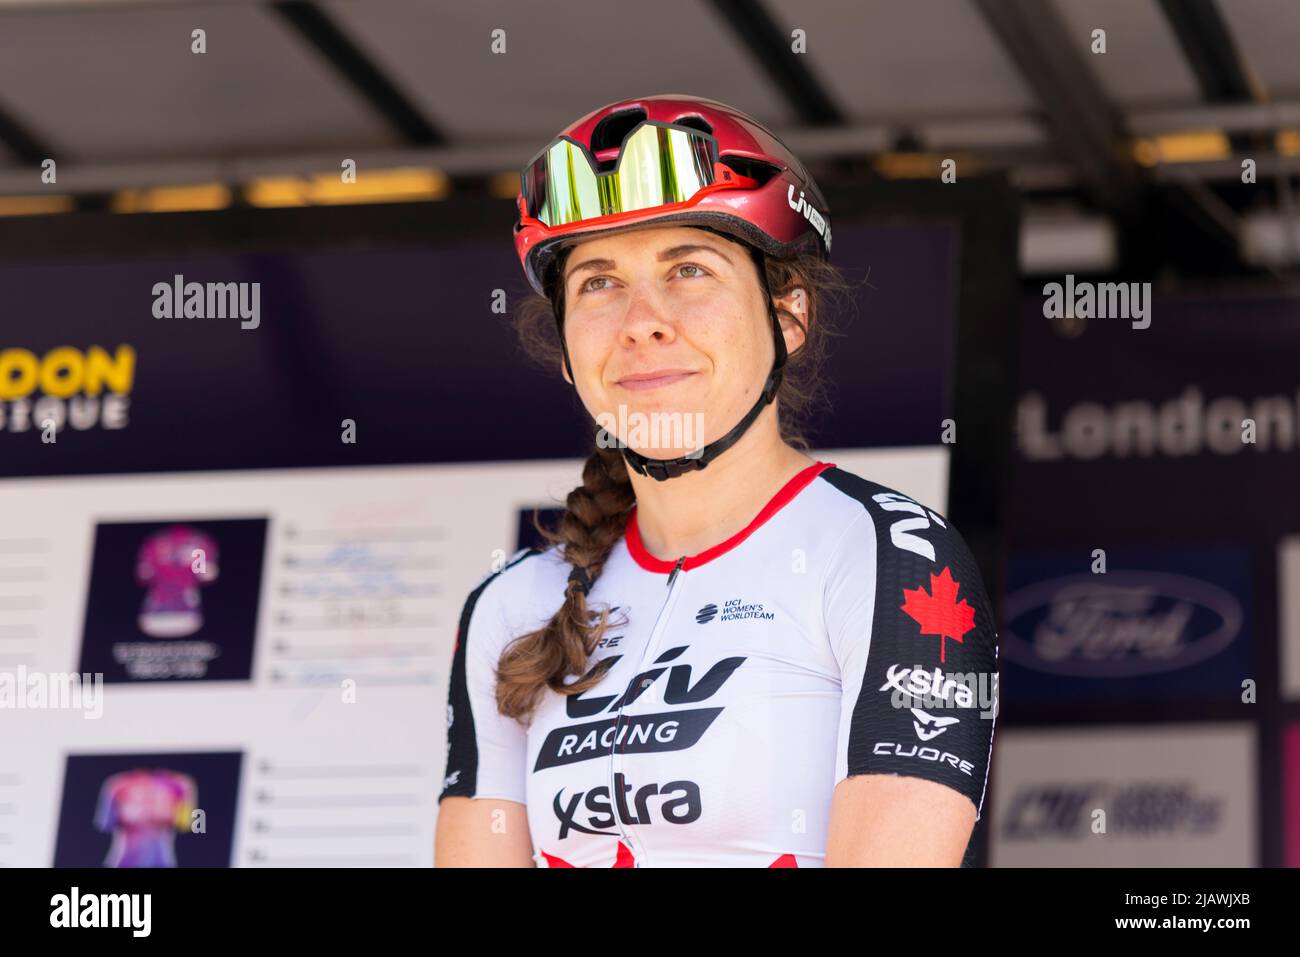 Alison Jackson of Liv Racing Xstra the RideLondon Classique cycle race, stage 1, at Maldon, Essex, UK. Canadian national champion jersey Stock Photo